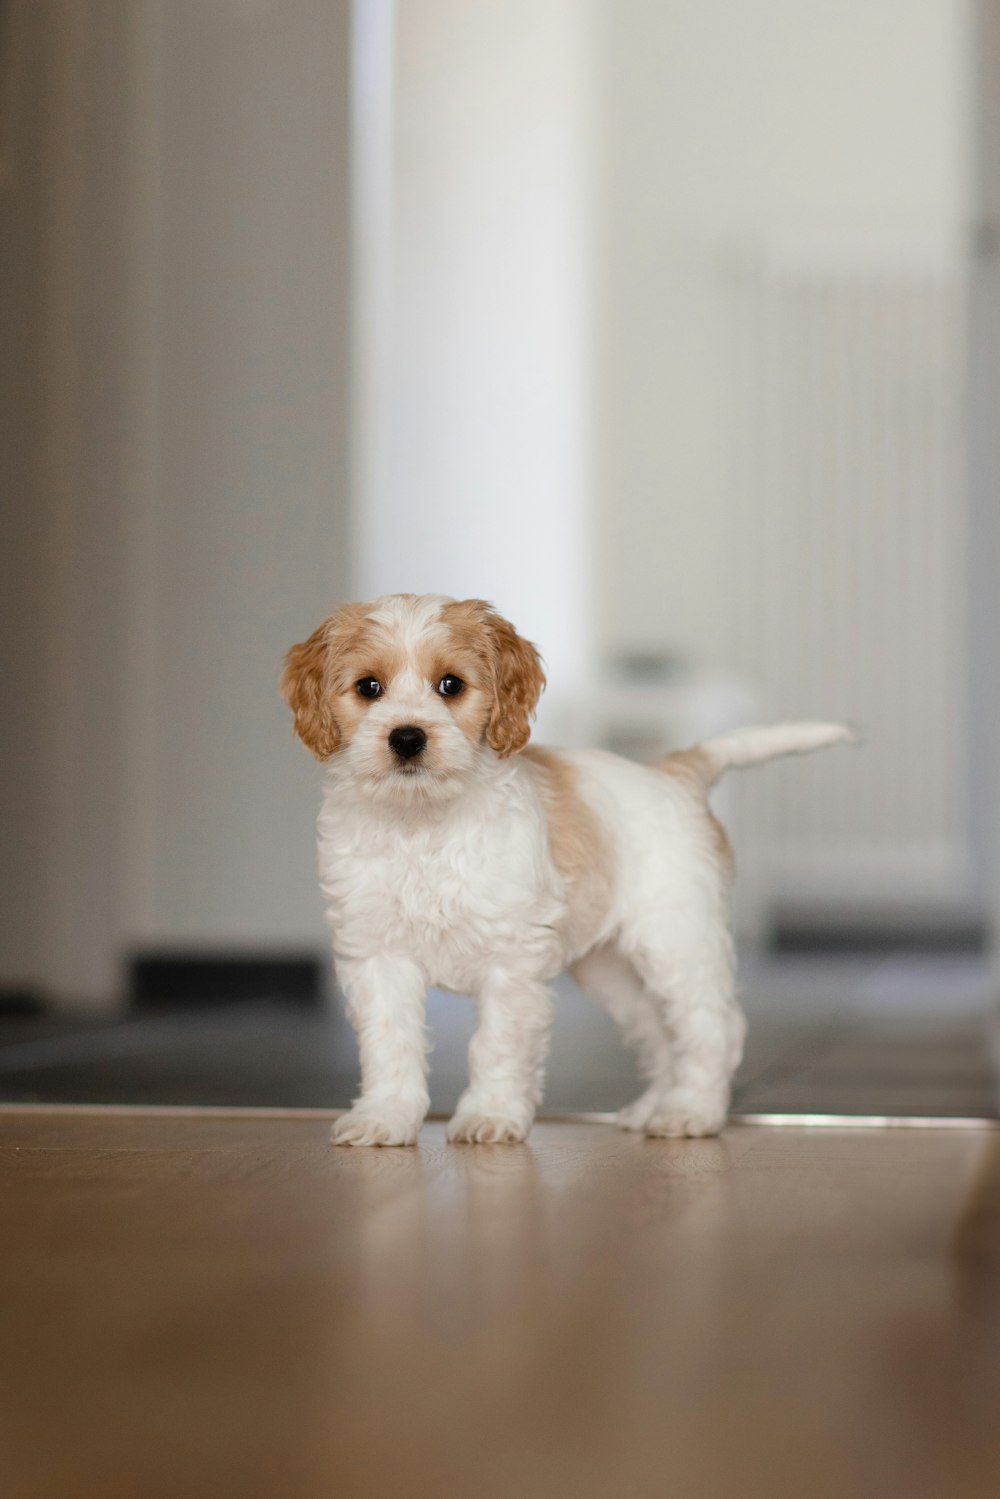 a small white and brown dog standing on top of a wooden floor